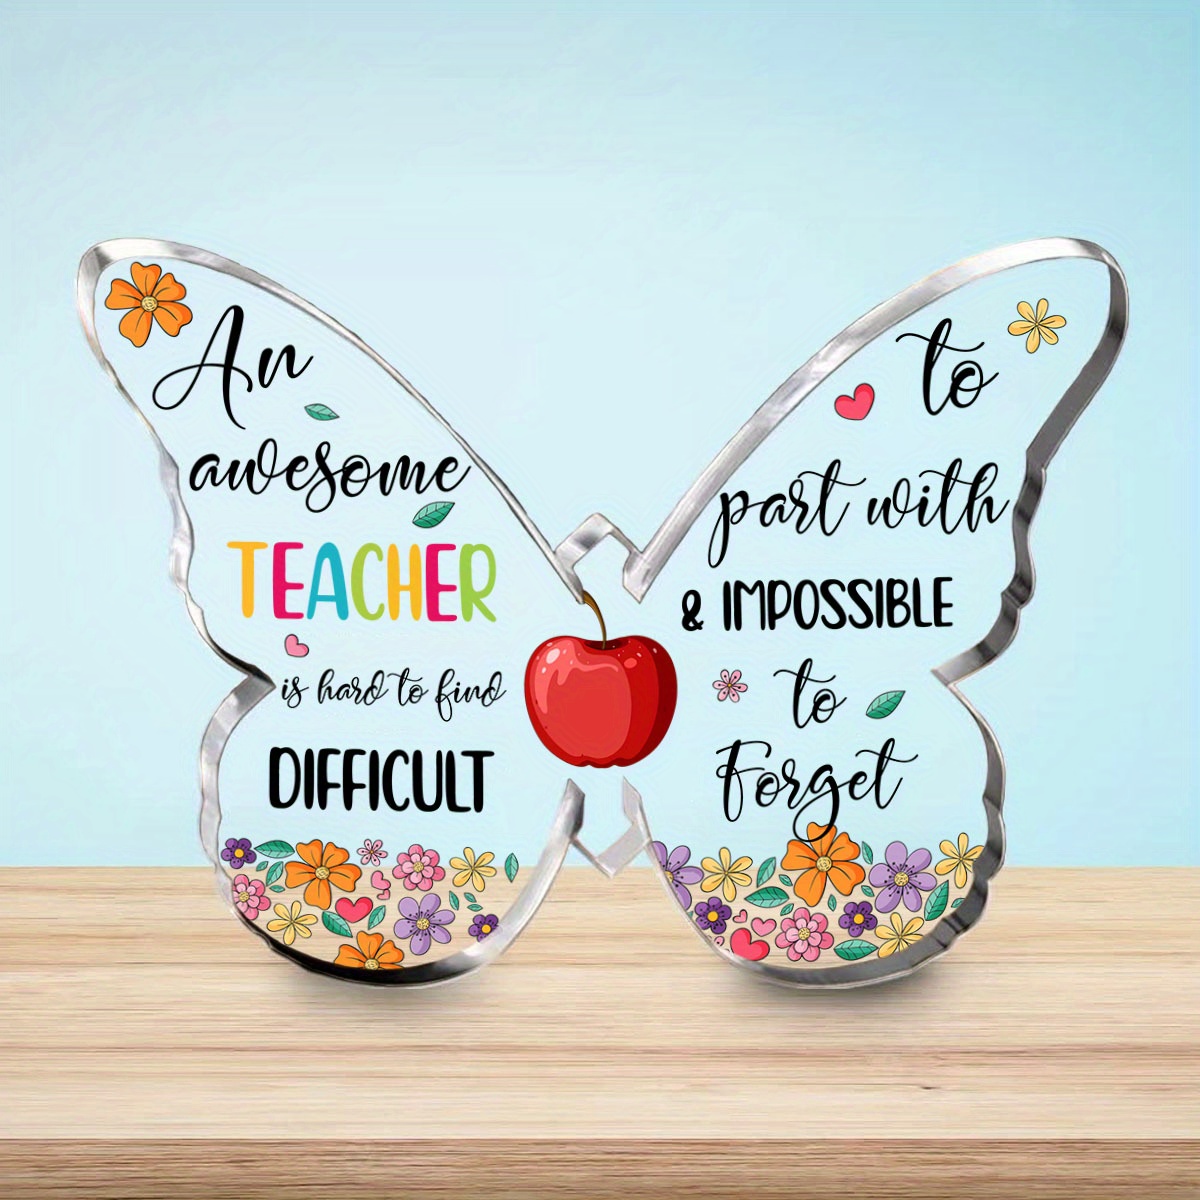 

1pc, Celebrate Christmas, Thanksgiving, Valentine's Day, Mother's Day With Our Acrylic Butterfly Desktop Ornament - A Perfect Gift For An Awesome Teacher!